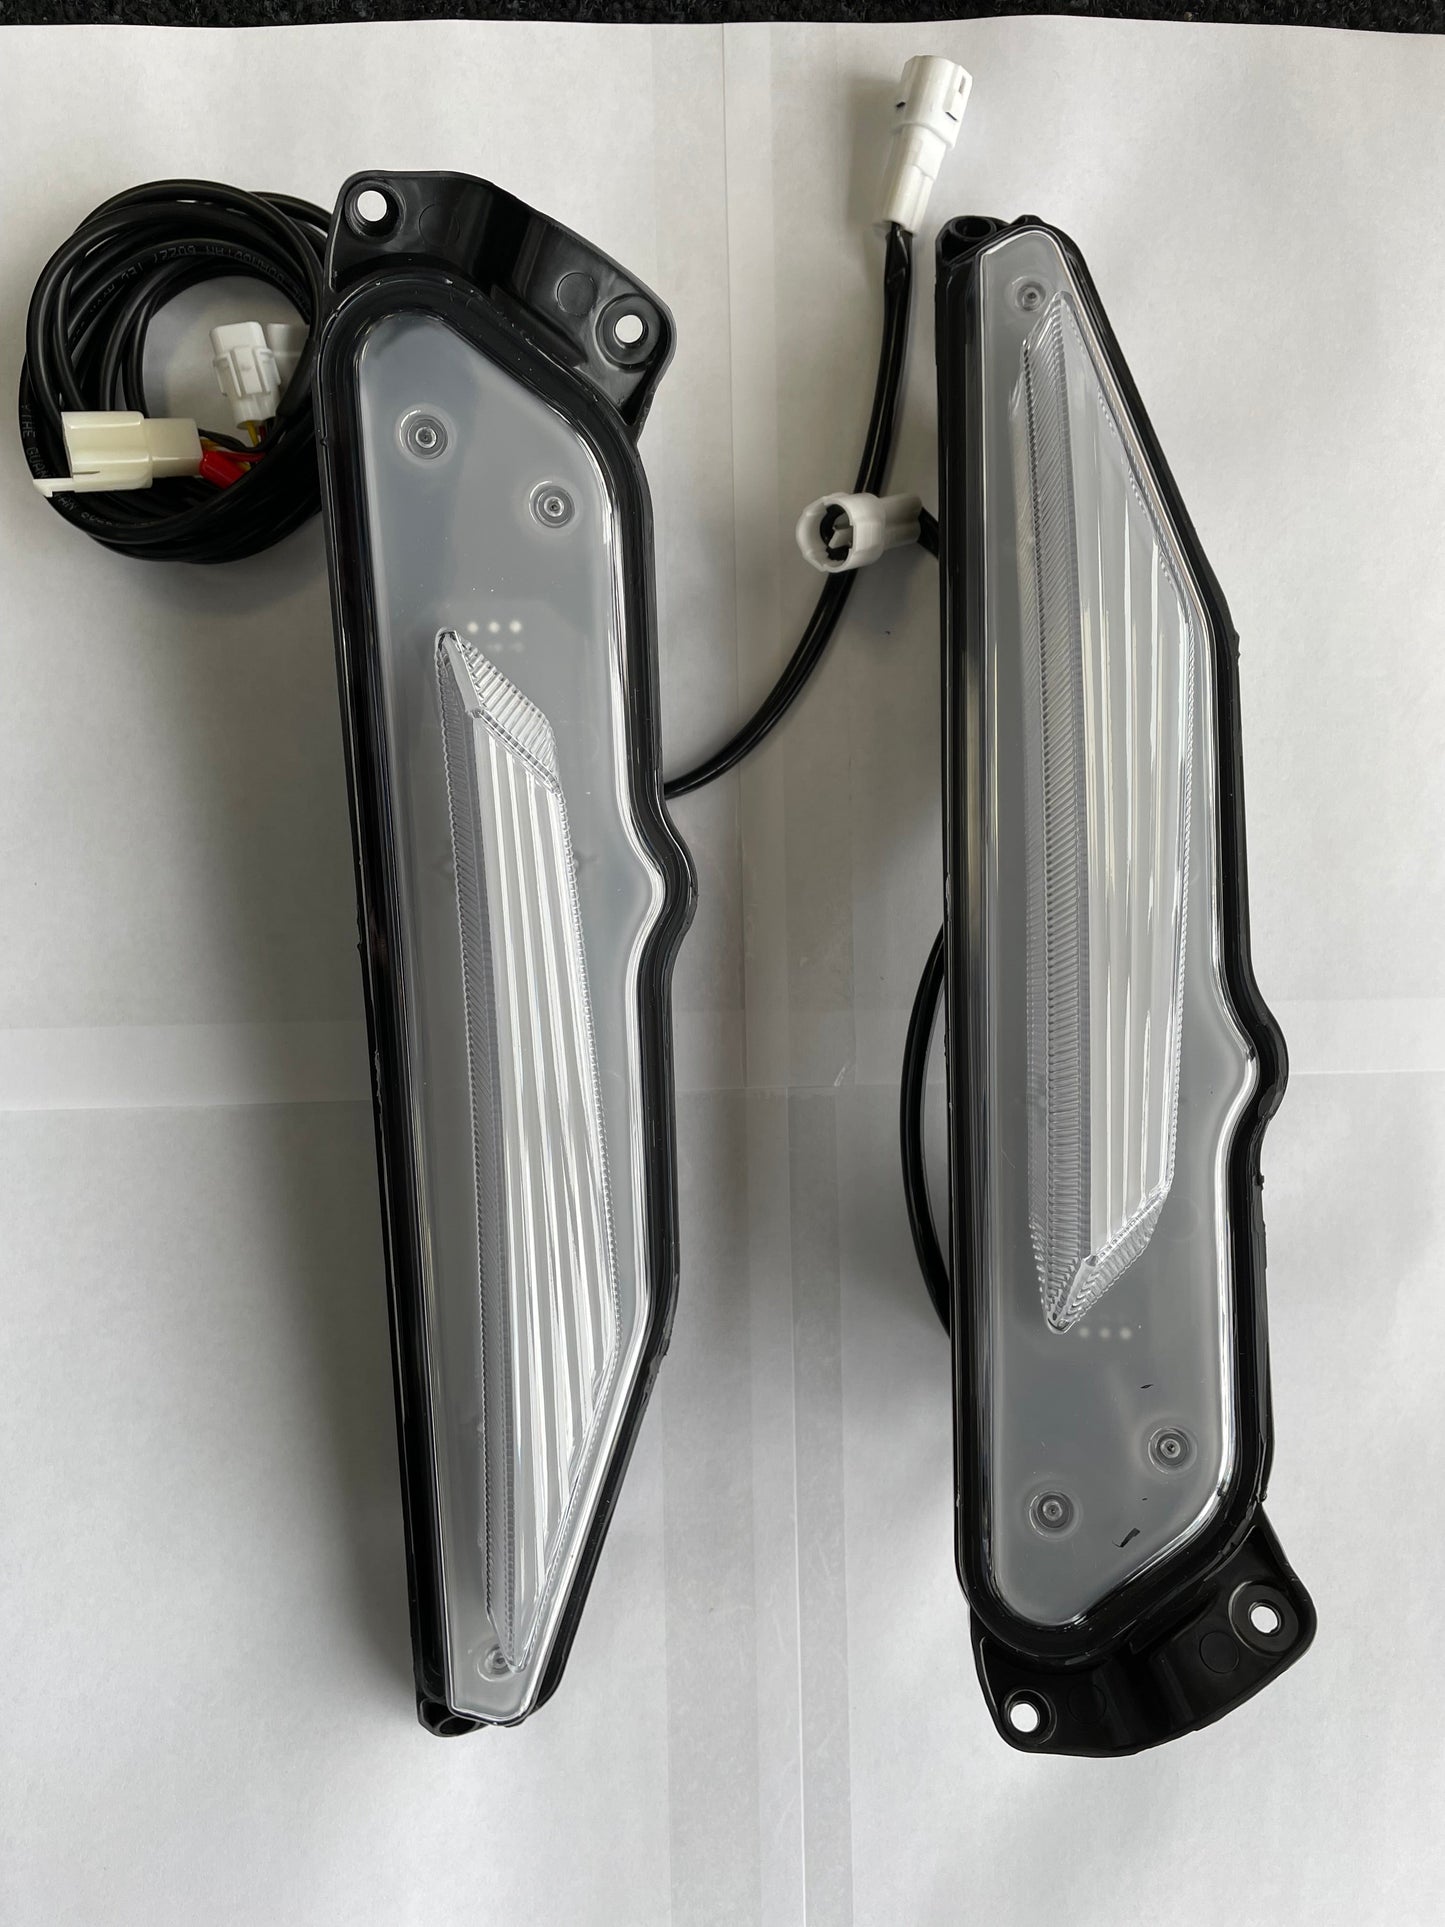 Ryco Street Legal Kit #2105-2001 with Accent Lights-Yamaha Wolverine both RMAX Models